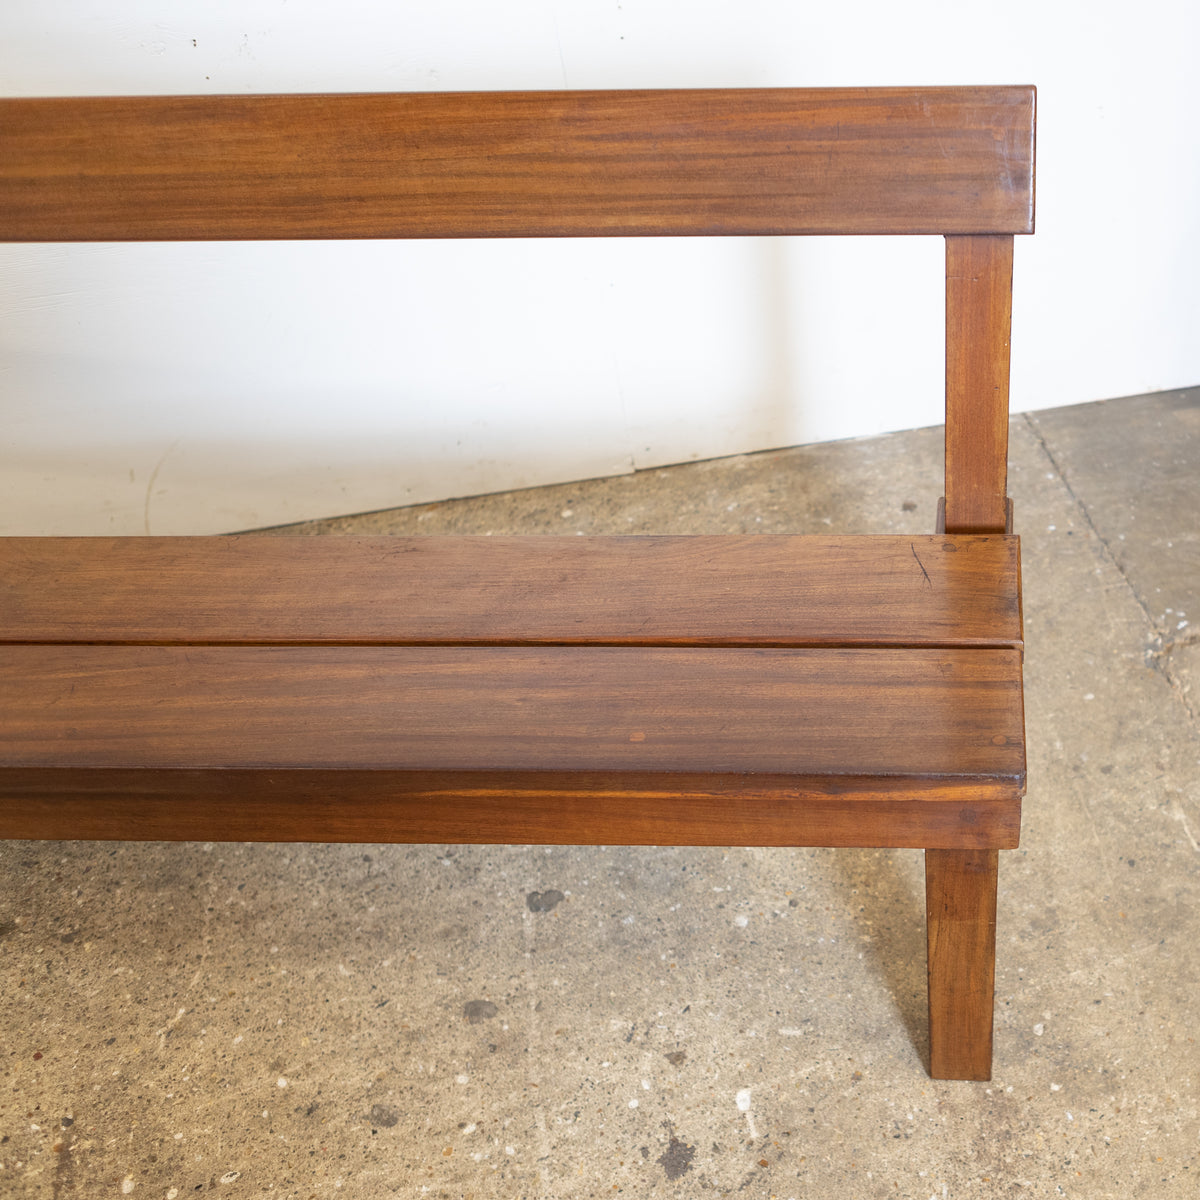 Reclaimed Solid Teak Bench Seat | The Architectural Forum